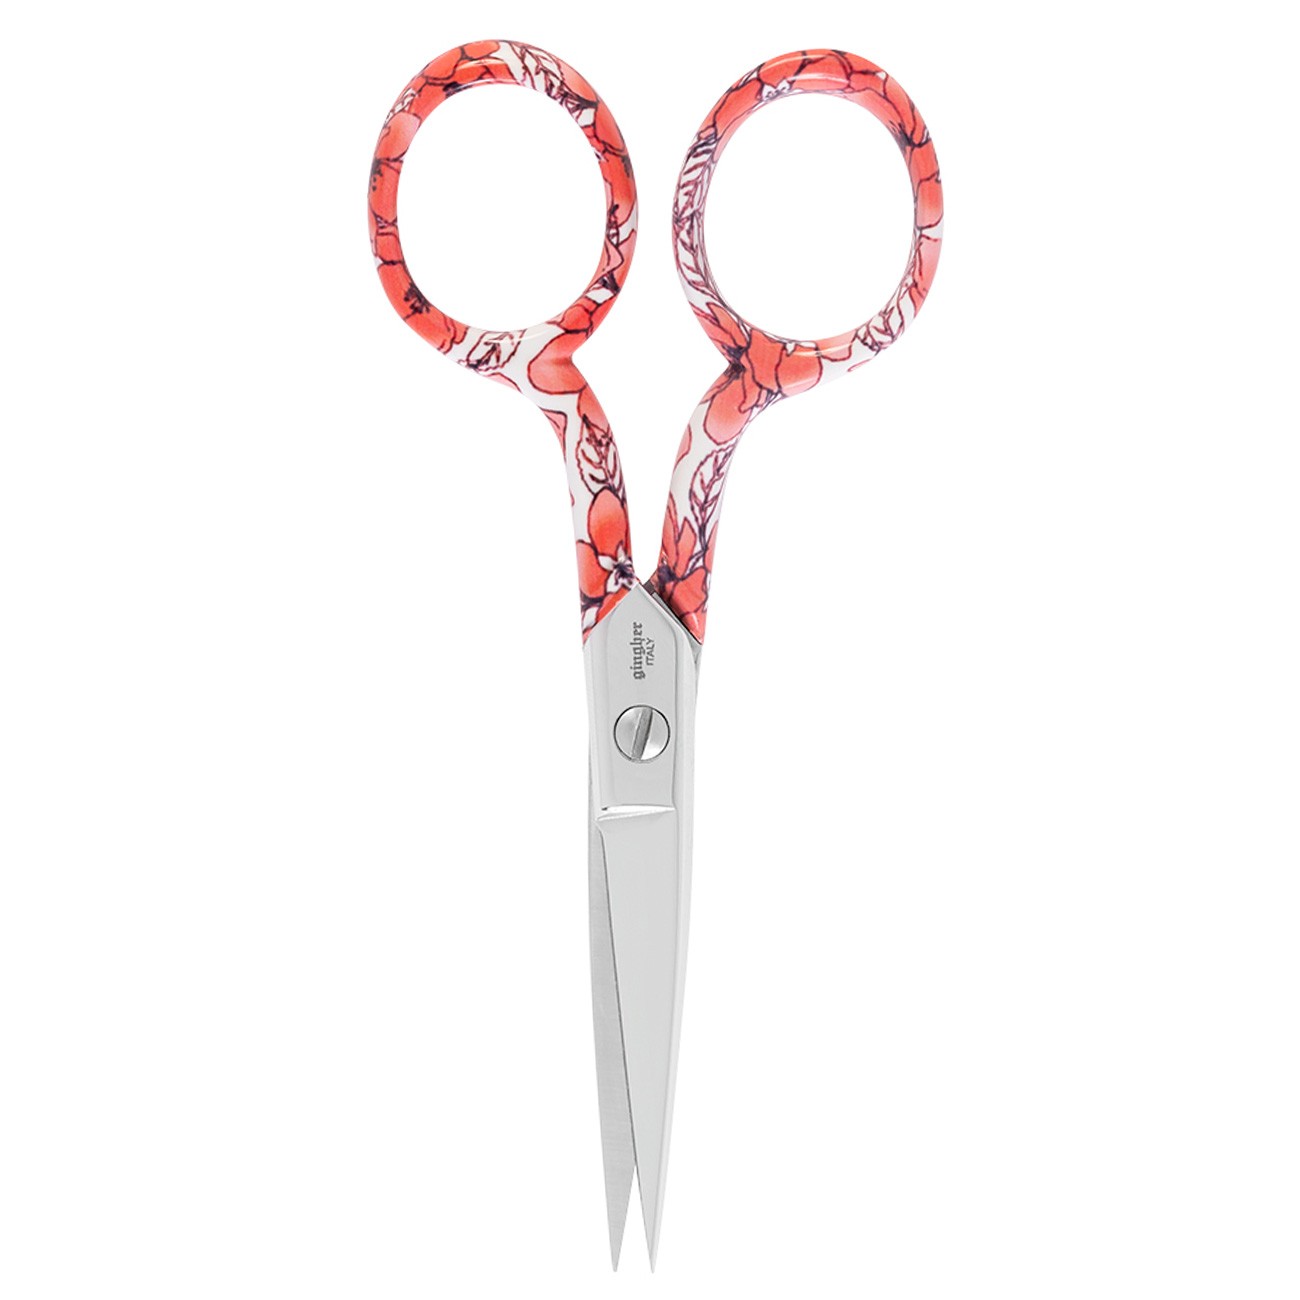 Gingher 2012 Emily 4 inches scissors Limited Series